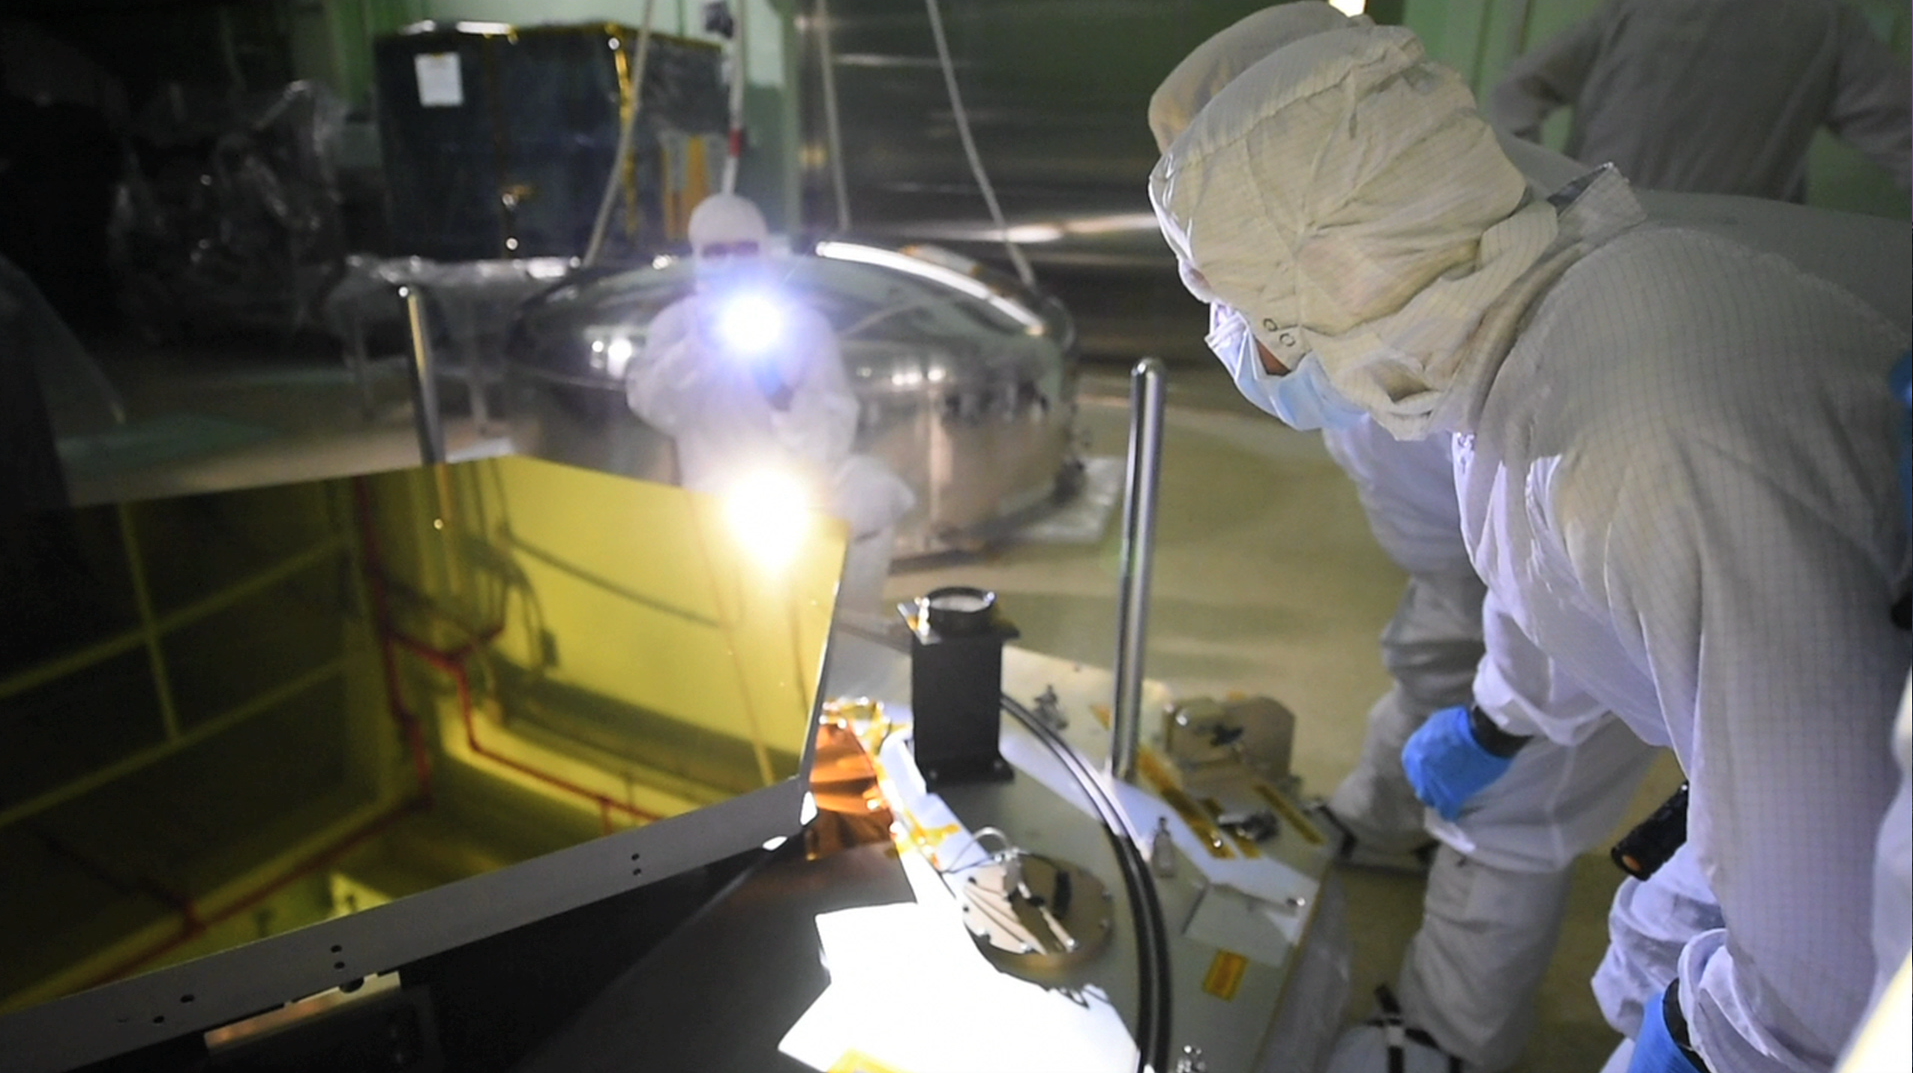 B-roll video of Webb Telescope mirrors being moved by engineers from NASA Goddard Space Flight Center’s large Space Systems Development and Integration Facility (SSDIF) through the facility to into the Calibration, Integration, and Alignment Facility (CIAF)